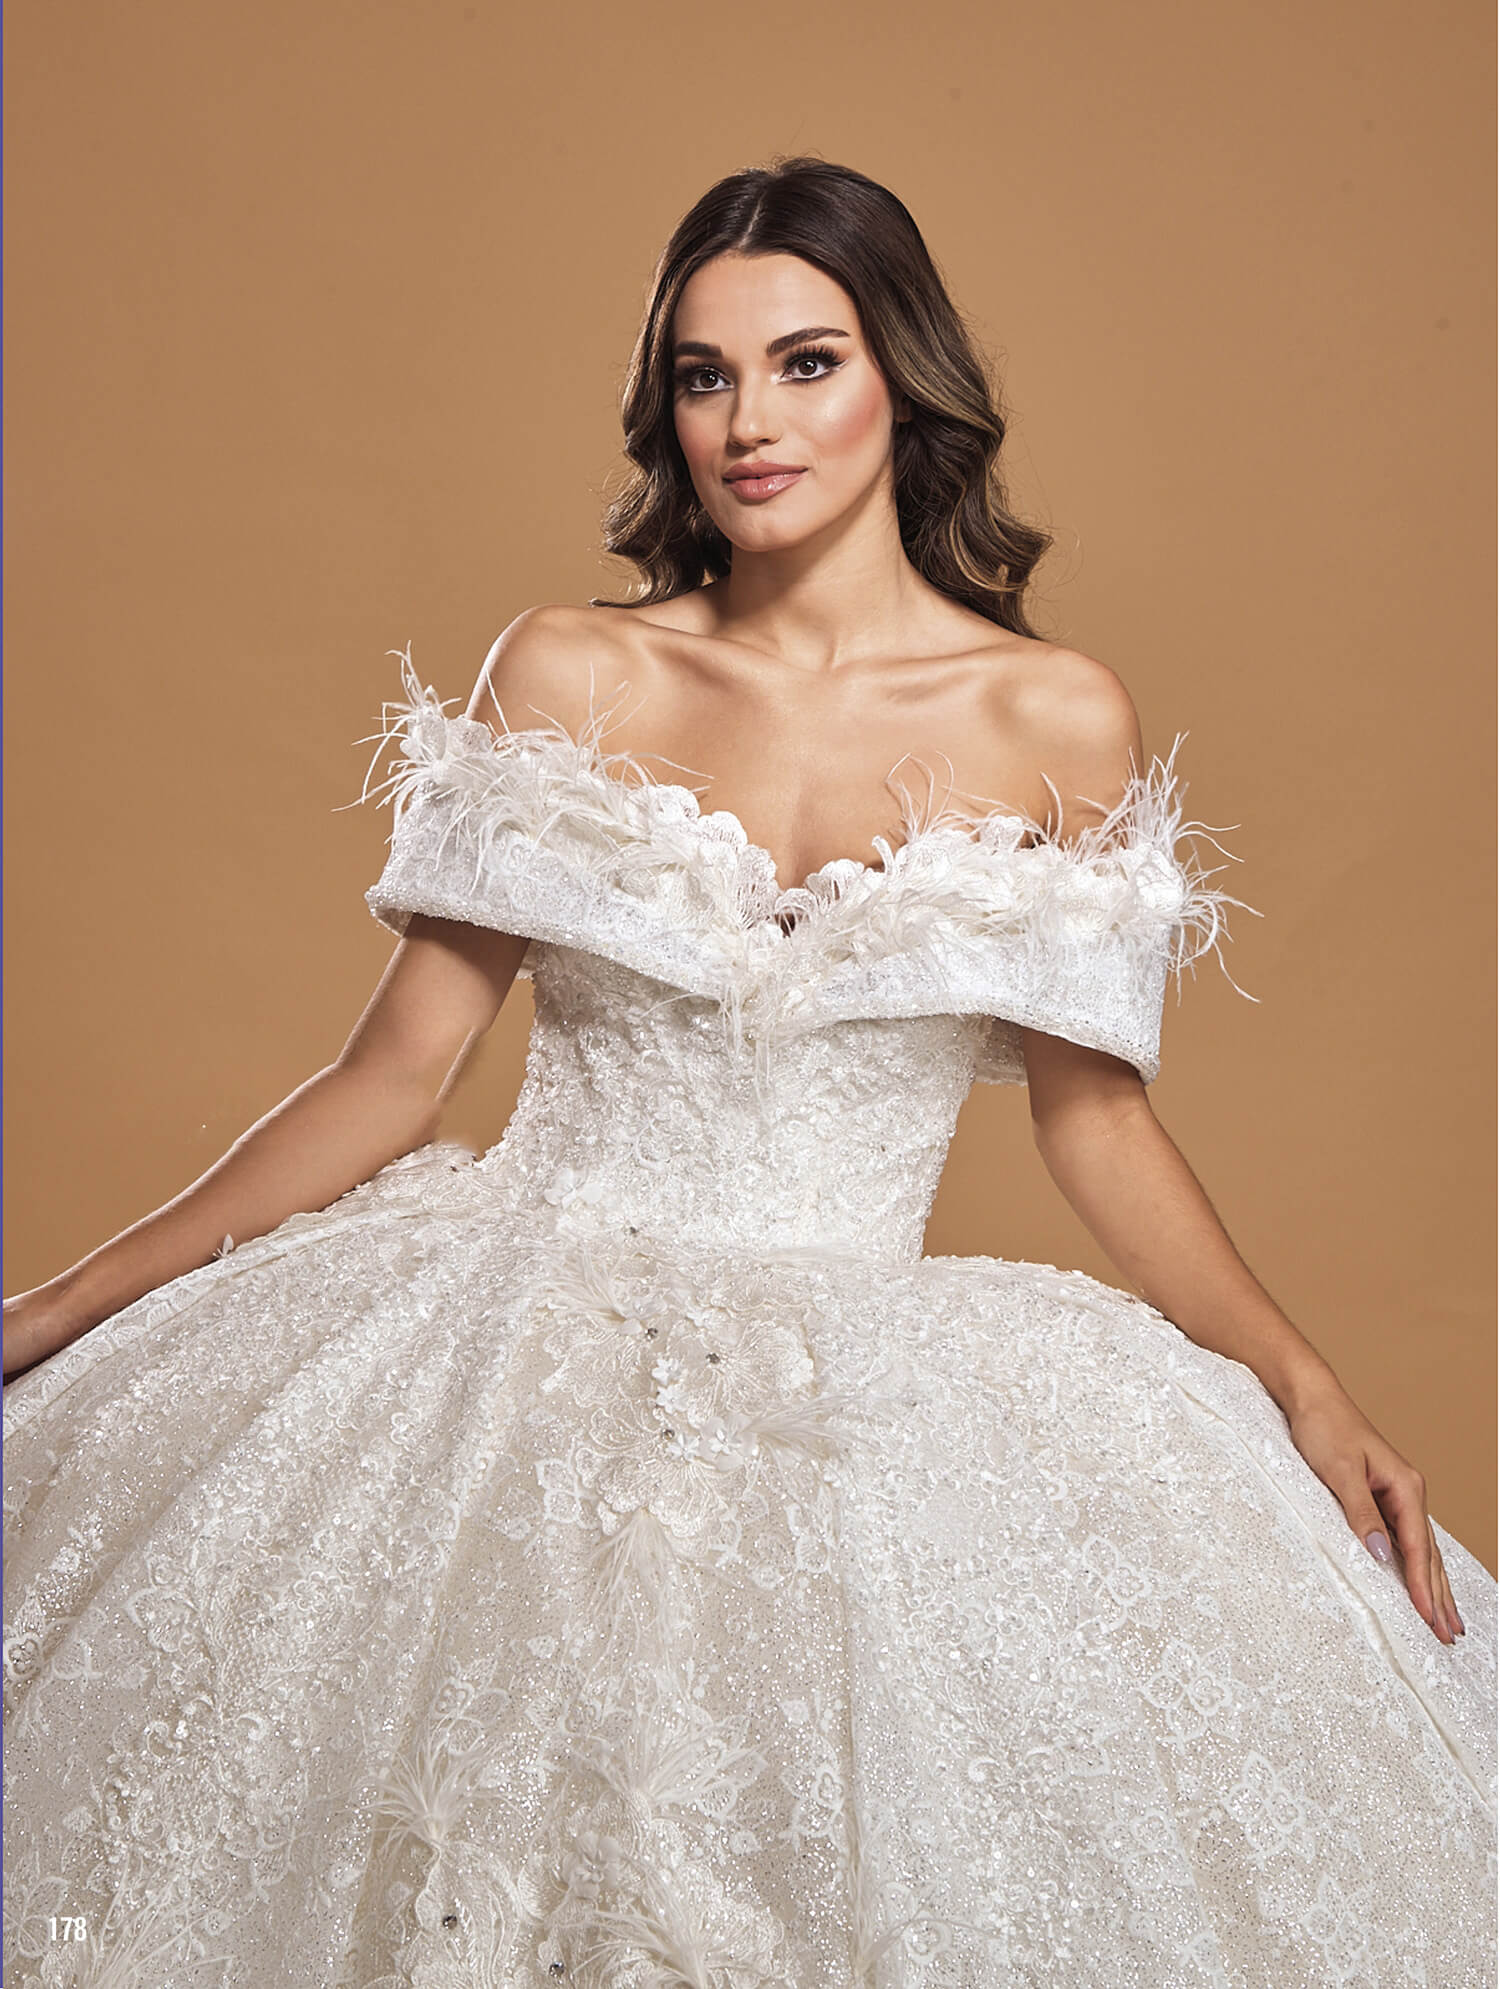 Appliqued Floral Patterned Helen Wedding Dress with Cape and Cap